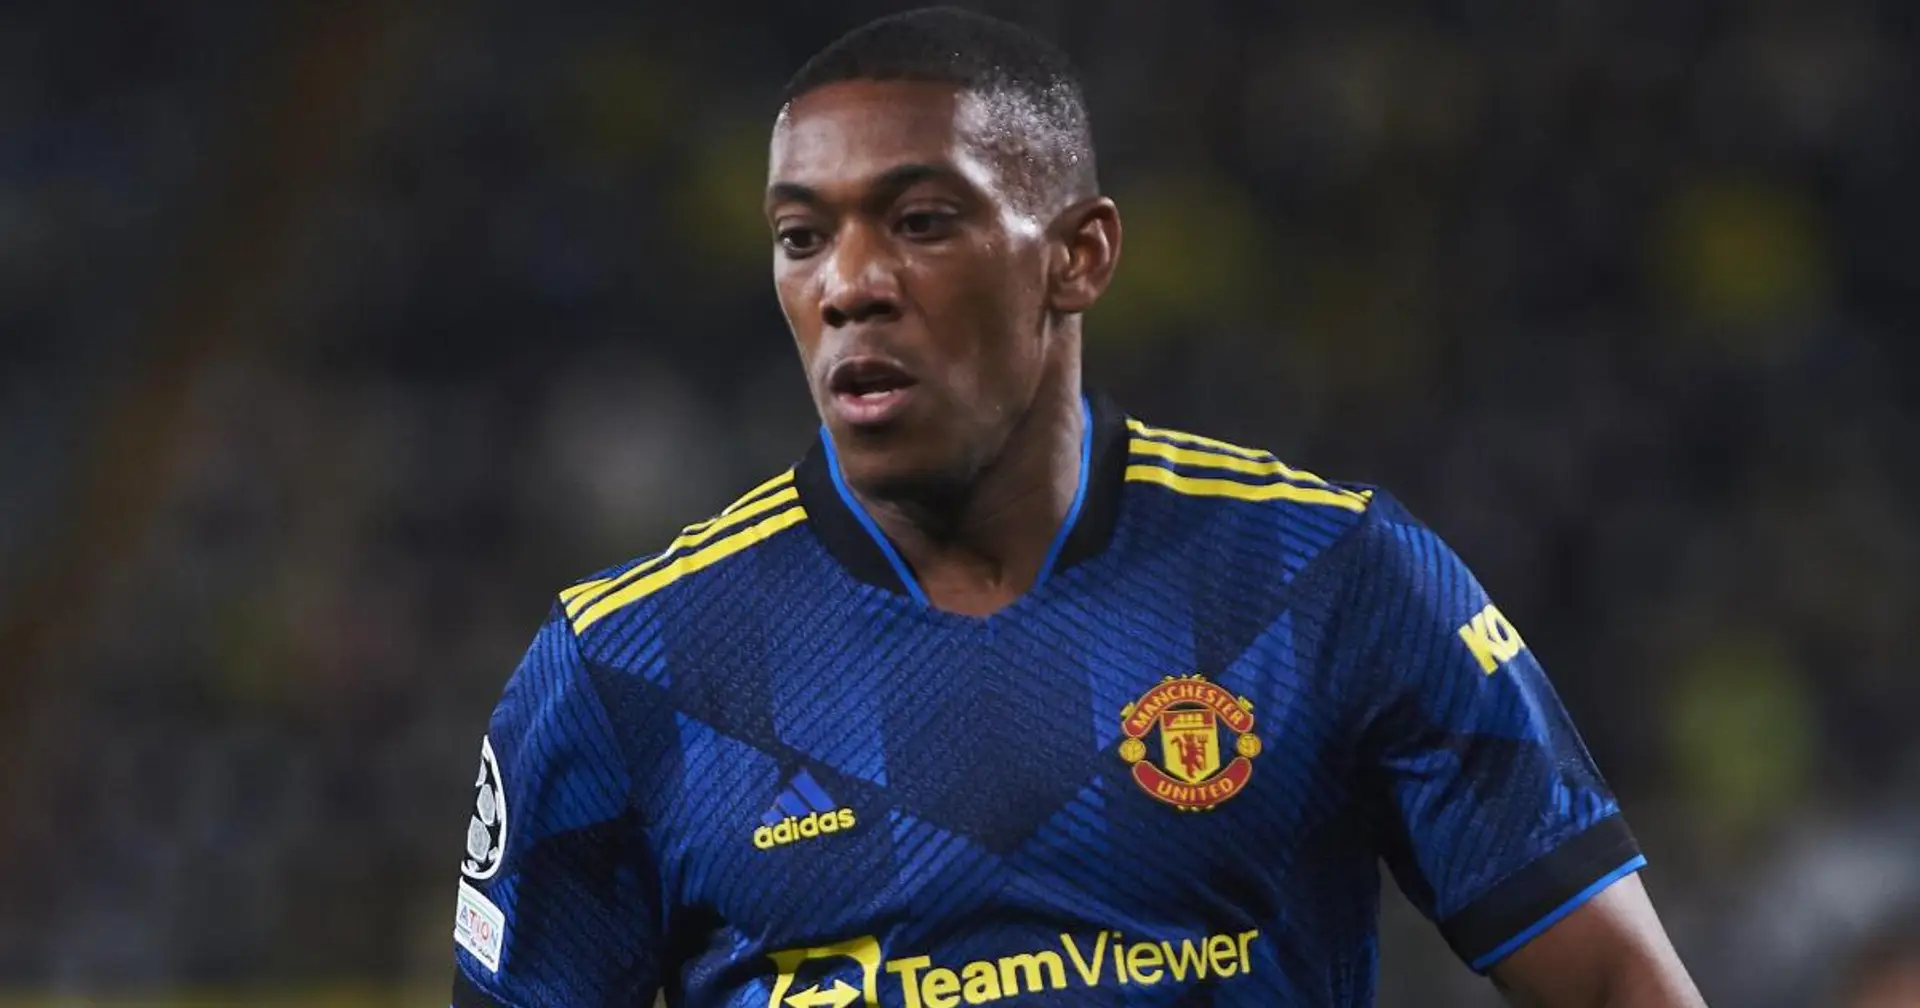 Anthony Martial's agent offers his client to Barcelona (reliability: 5 stars)